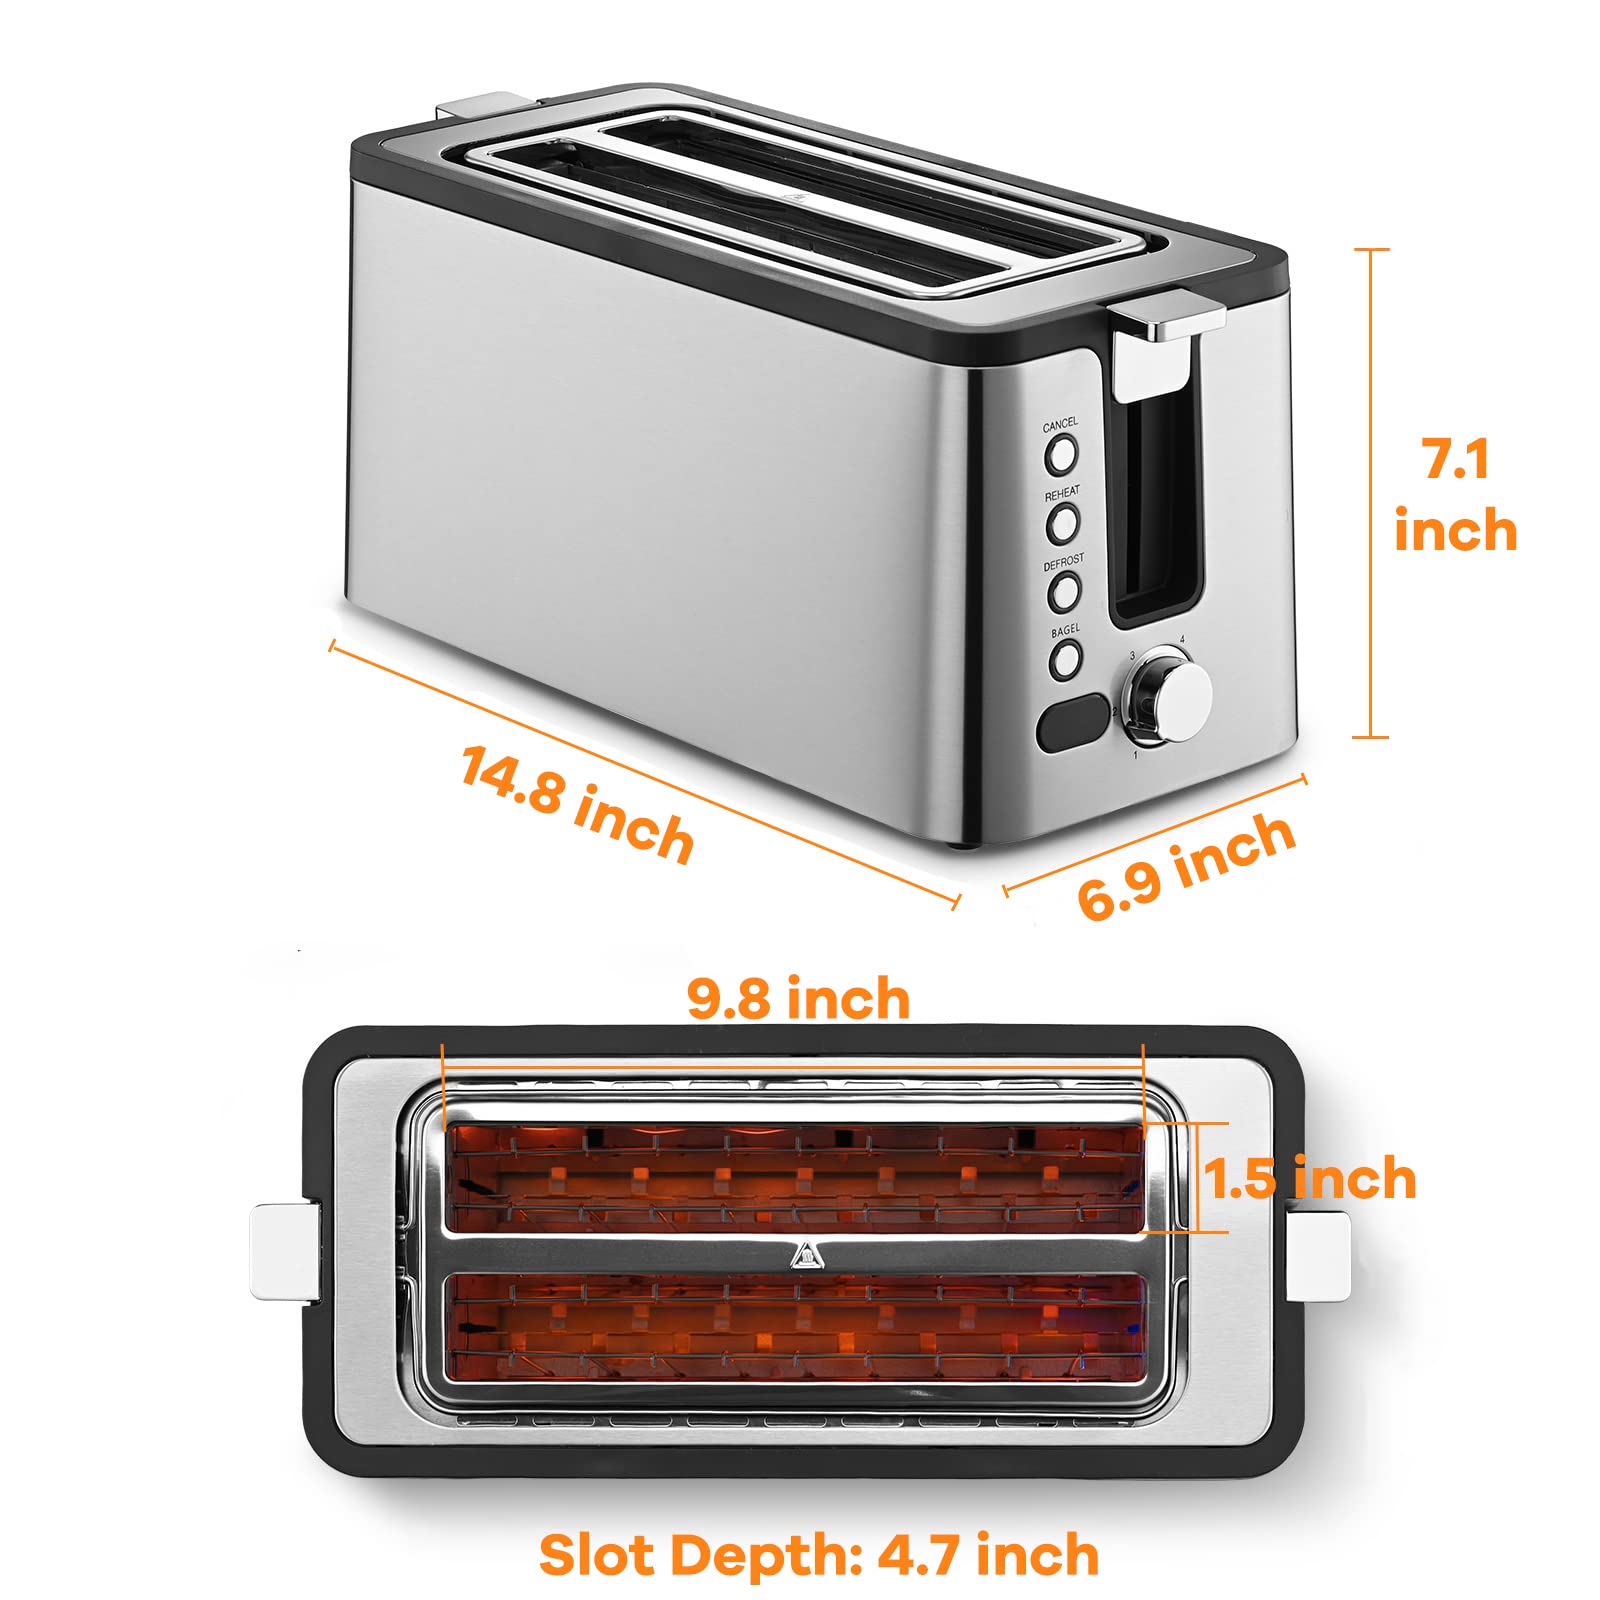 Mecity 4 Slice Toaster, Long Slot Toaster With Countdown Timer, Bagel / Defrost / Reheat / Cancel Functions,Warming Rack, removable Crumb Tray, 6 Browning Settings, Extra Wide Long Slots, Stainless Steel Bread Toaster, 1300 Watts